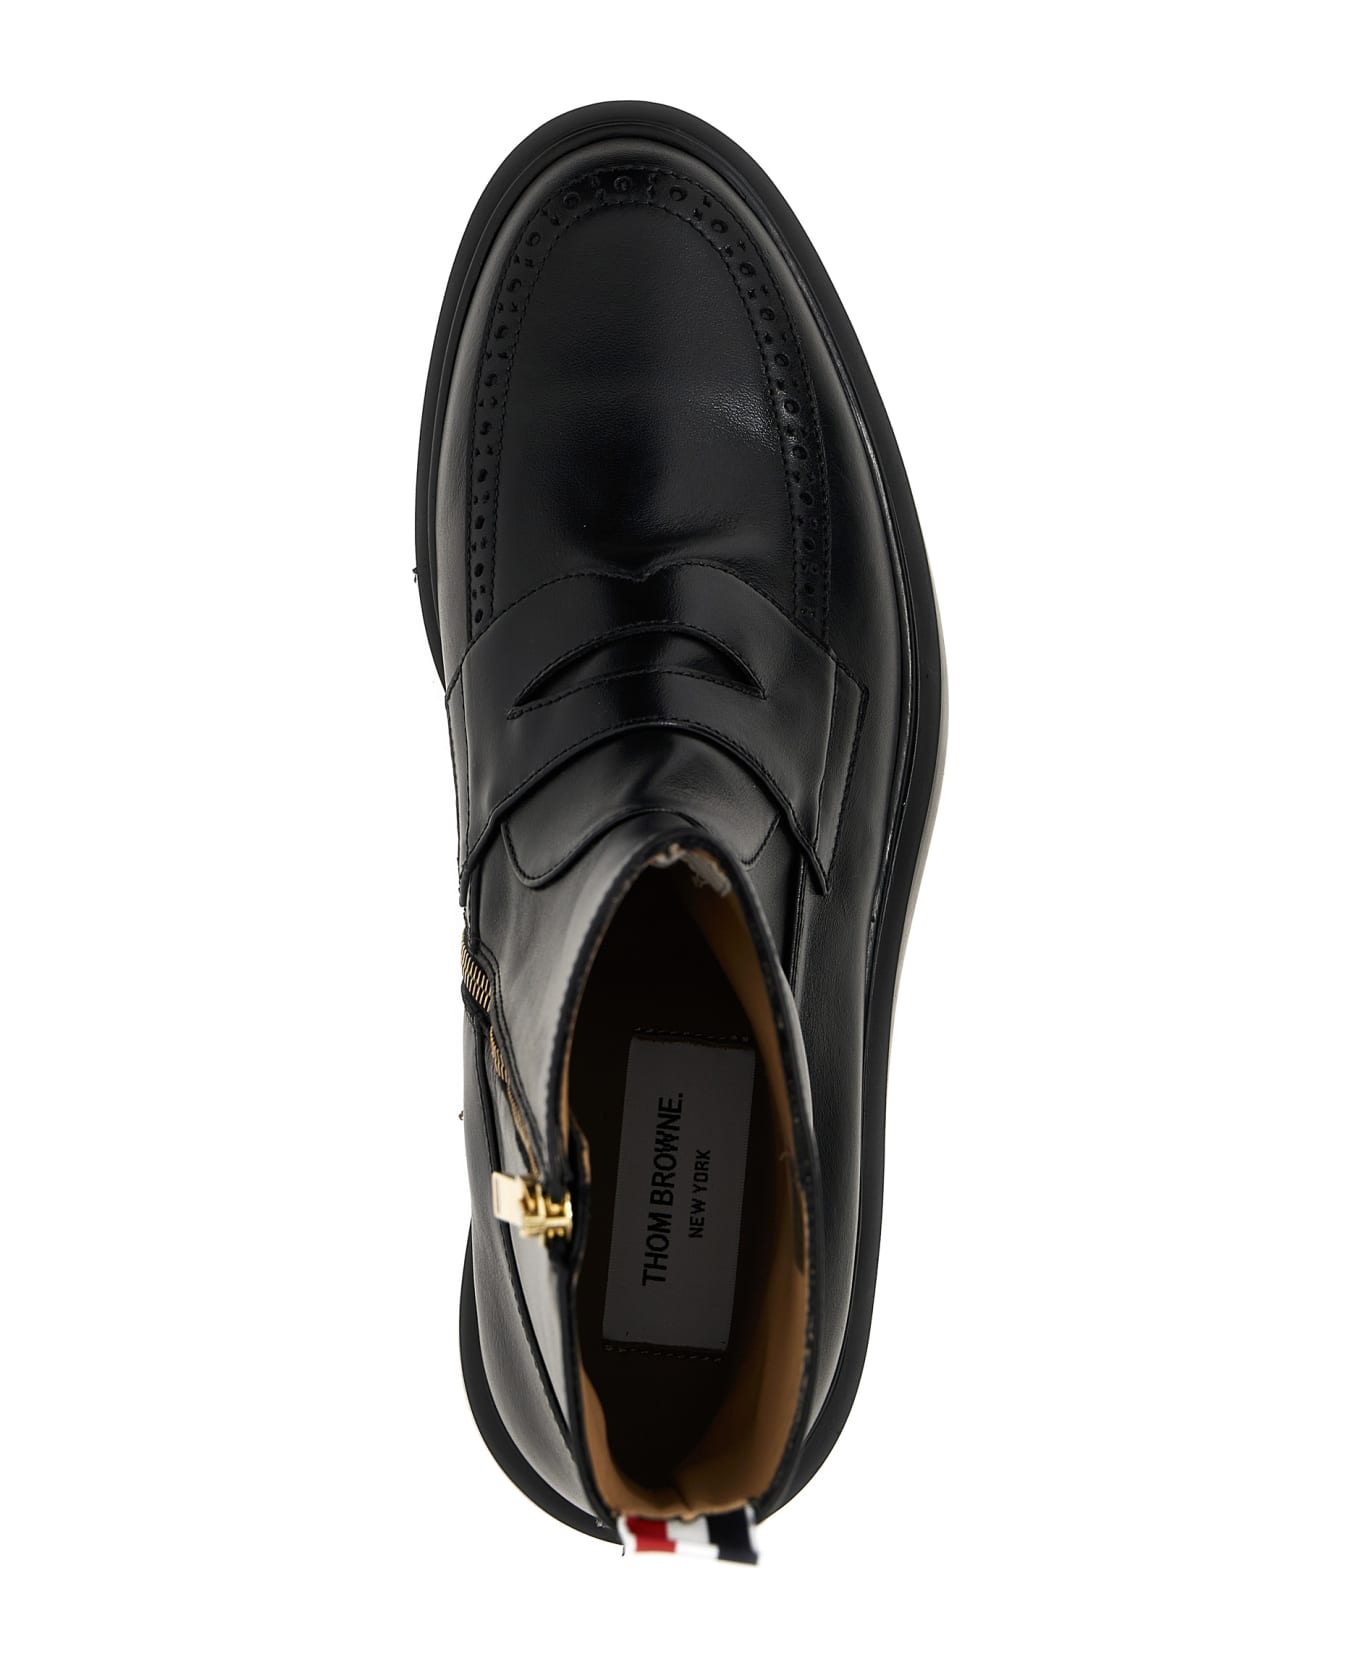 Thom Browne 'penny Loafer' Ankle Boots - Black ブーツ